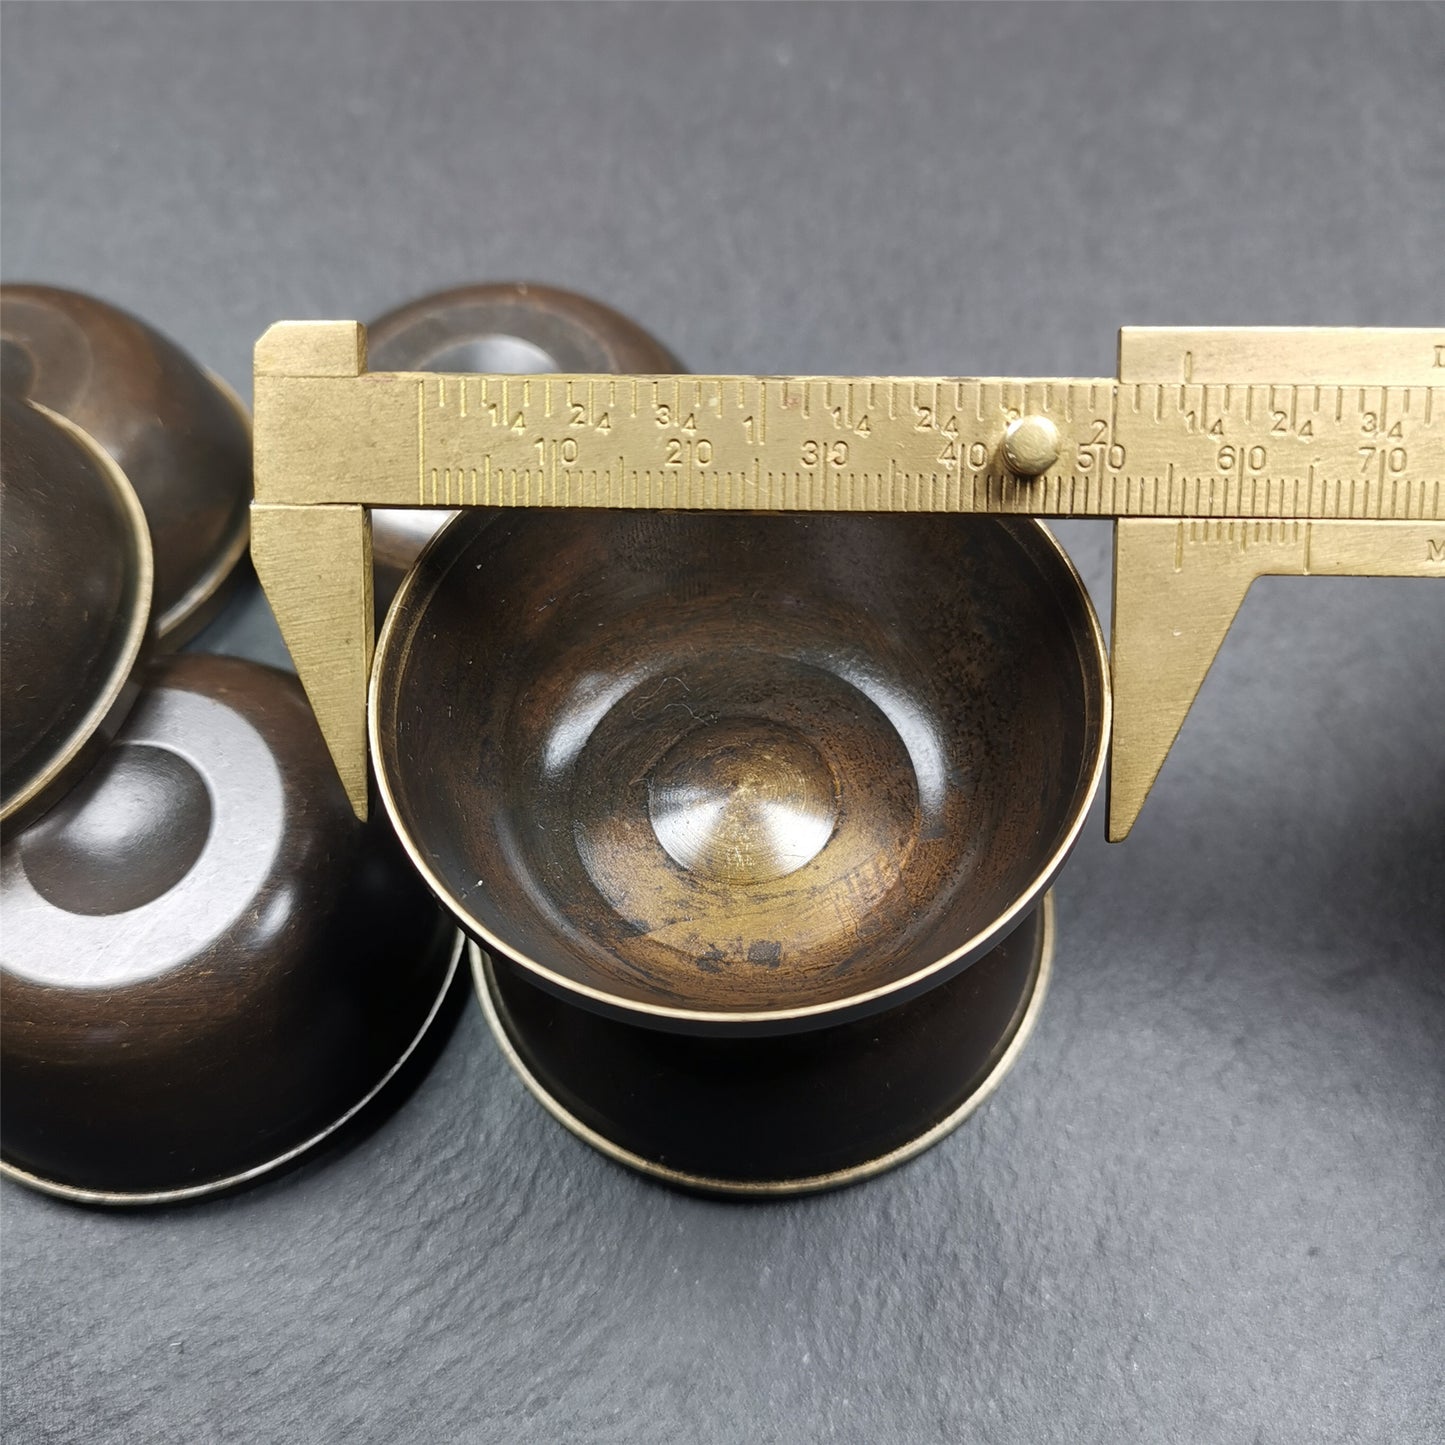 This set of tibetan water offering bowls are handmade by Tibetan craftsmen from Tibet. ABOUT Offering Bowls The most common type of offering on Tibetan Buddhist shrines are made with seven water offering bowls — called “yonchap” in Tibetan.